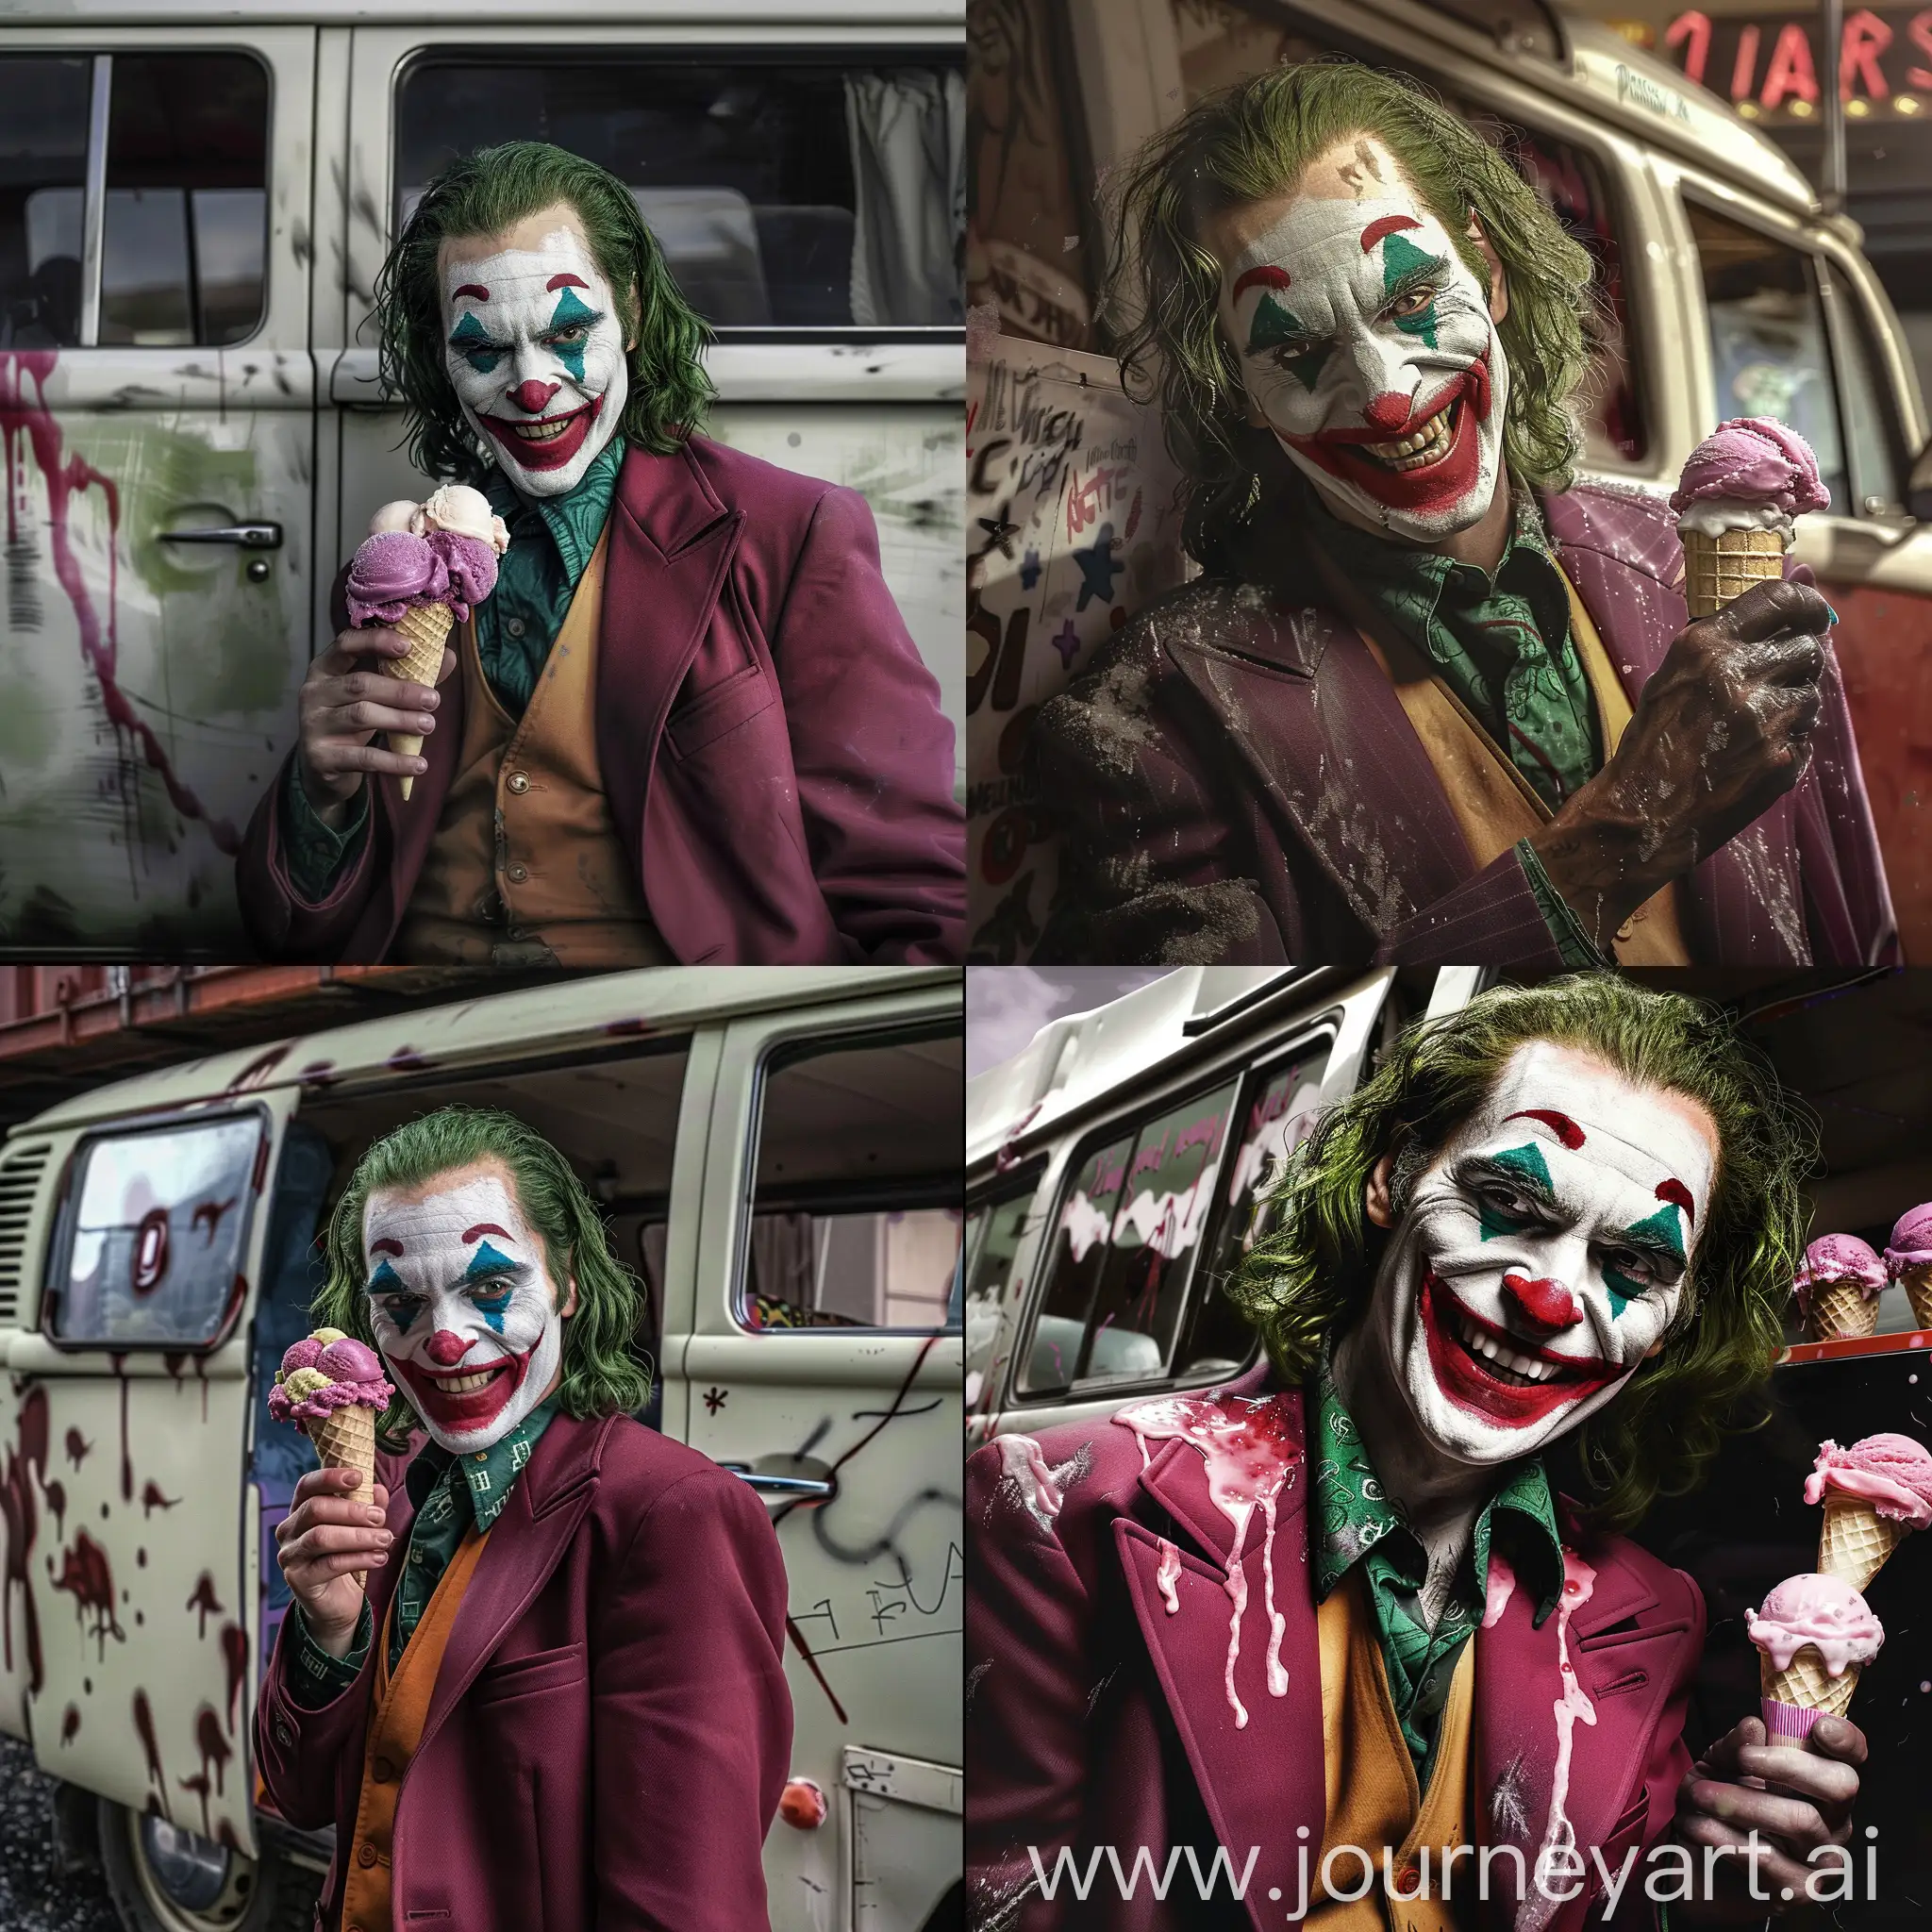 real photo of a smiling Joker with ice cream near the van, super detailed photo, perfect photo